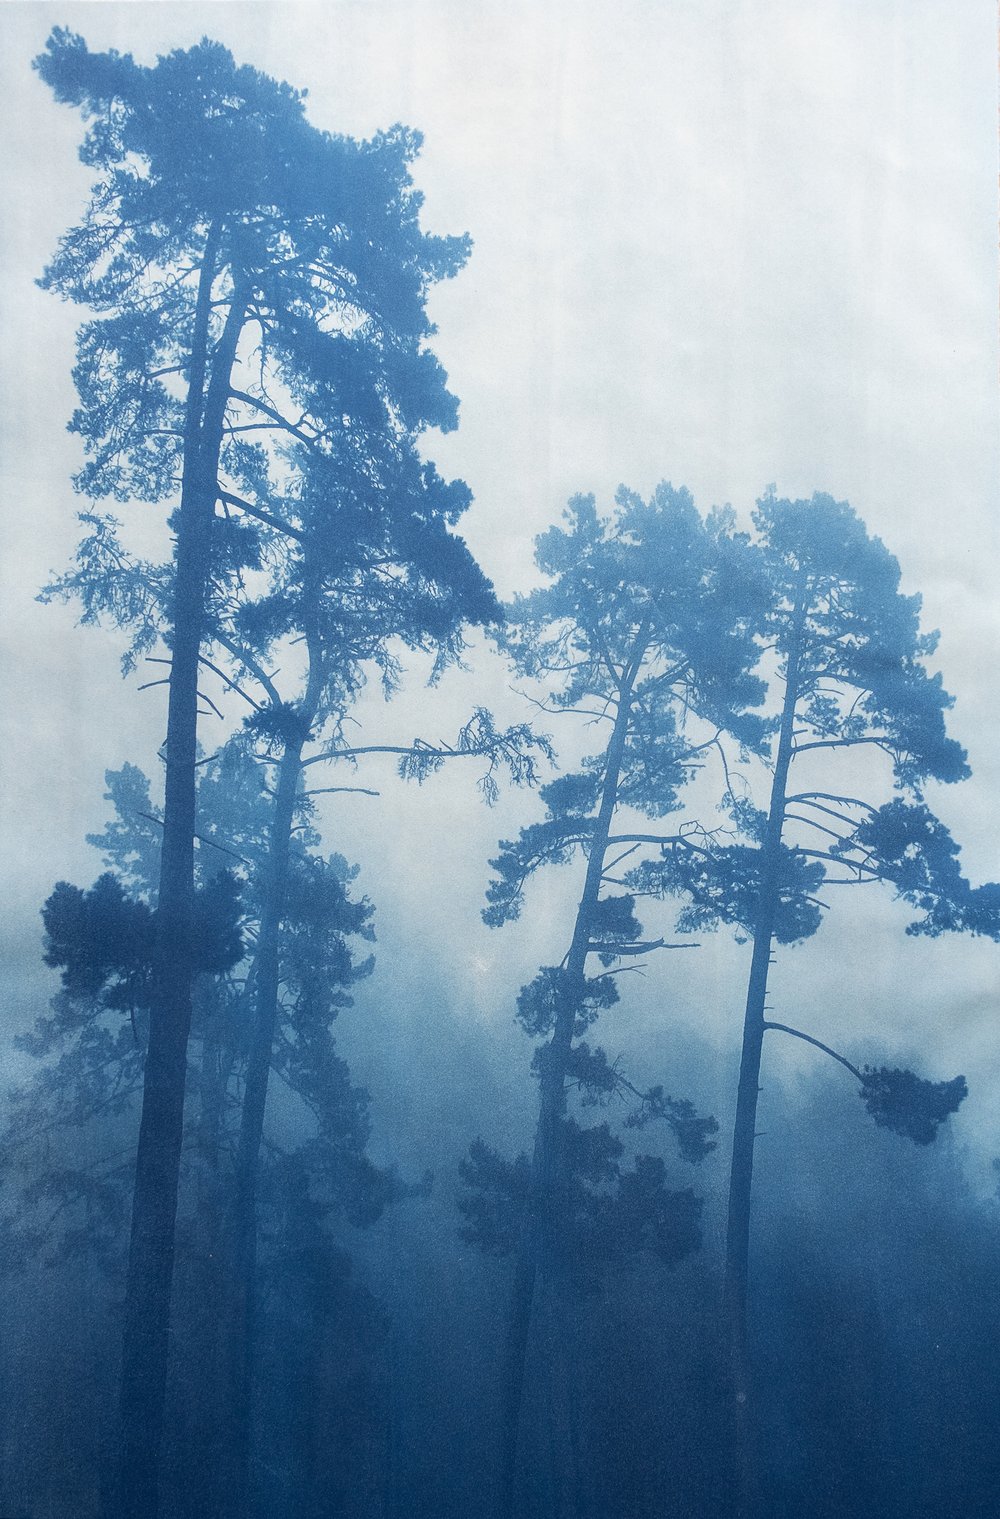 "Foggy Morning Pines" by Christine So